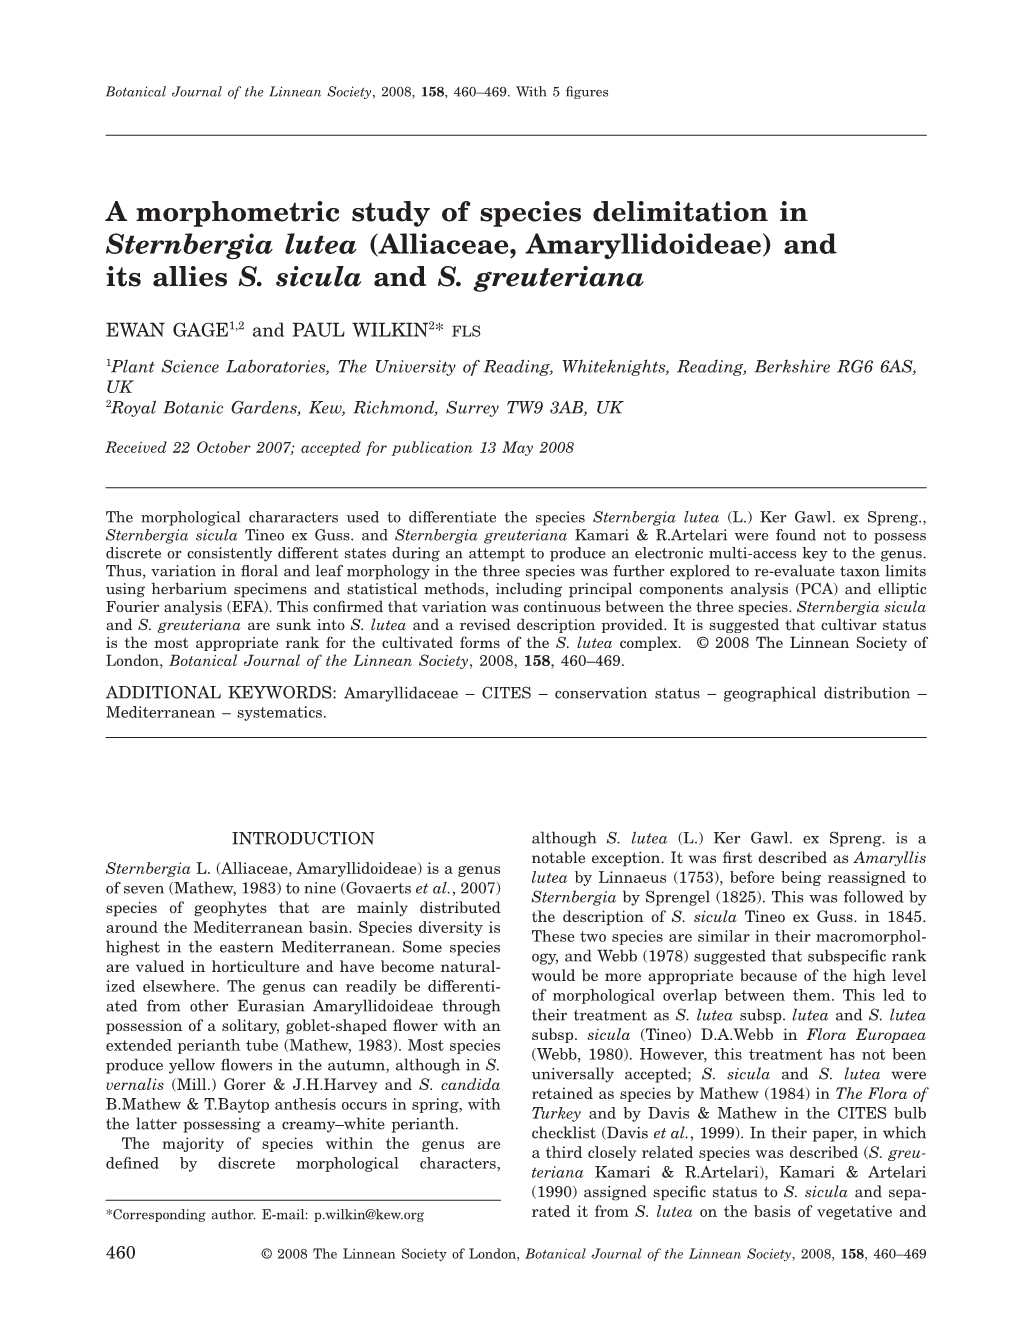 A Morphometric Study of Species Delimitation in Sternbergia Lutea (Alliaceae, Amaryllidoideae) and Its Allies S